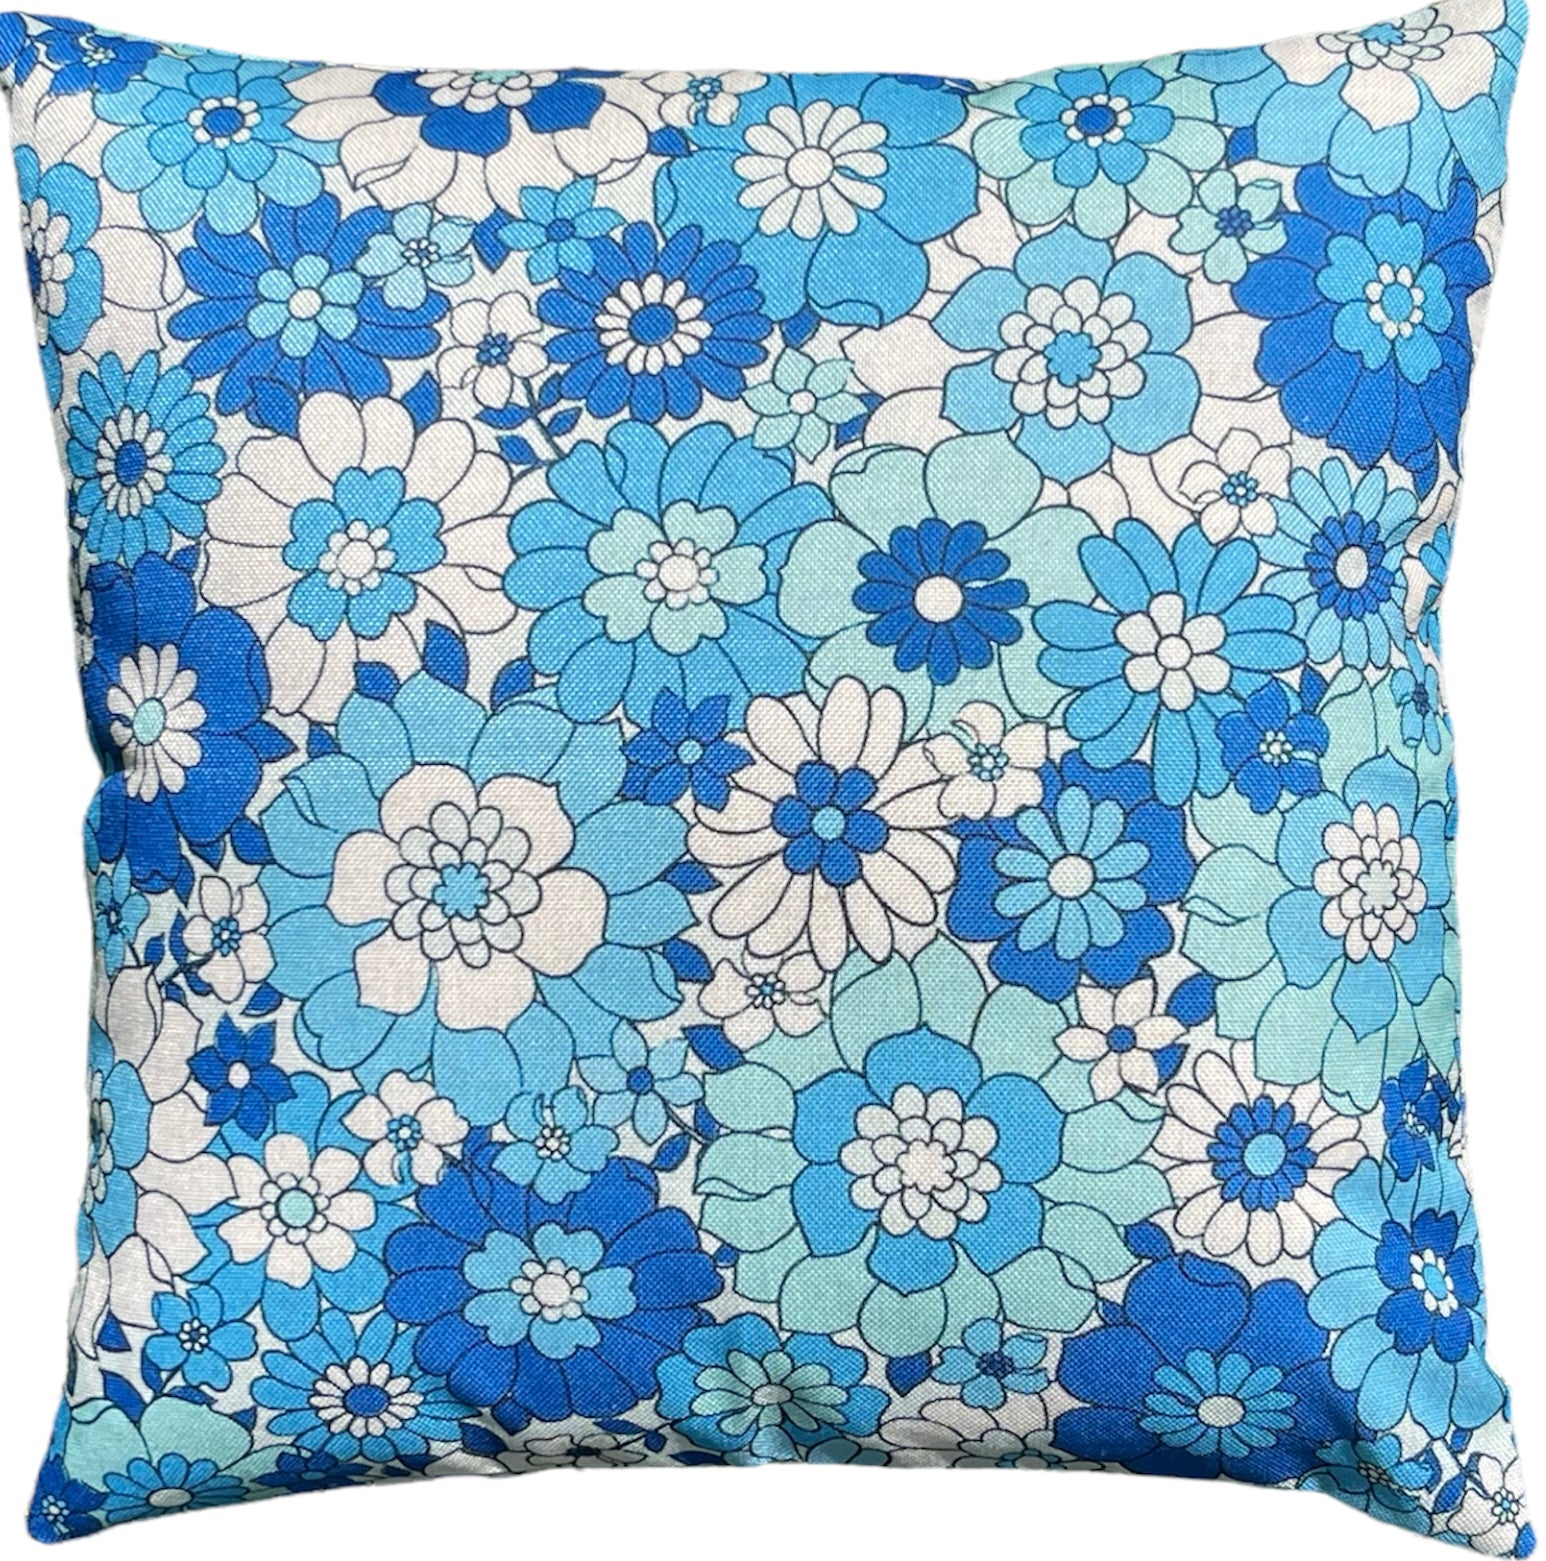 Groovy Blue and White Flower Power 18 by 18 inch Pillow Case Cover –  Relic828